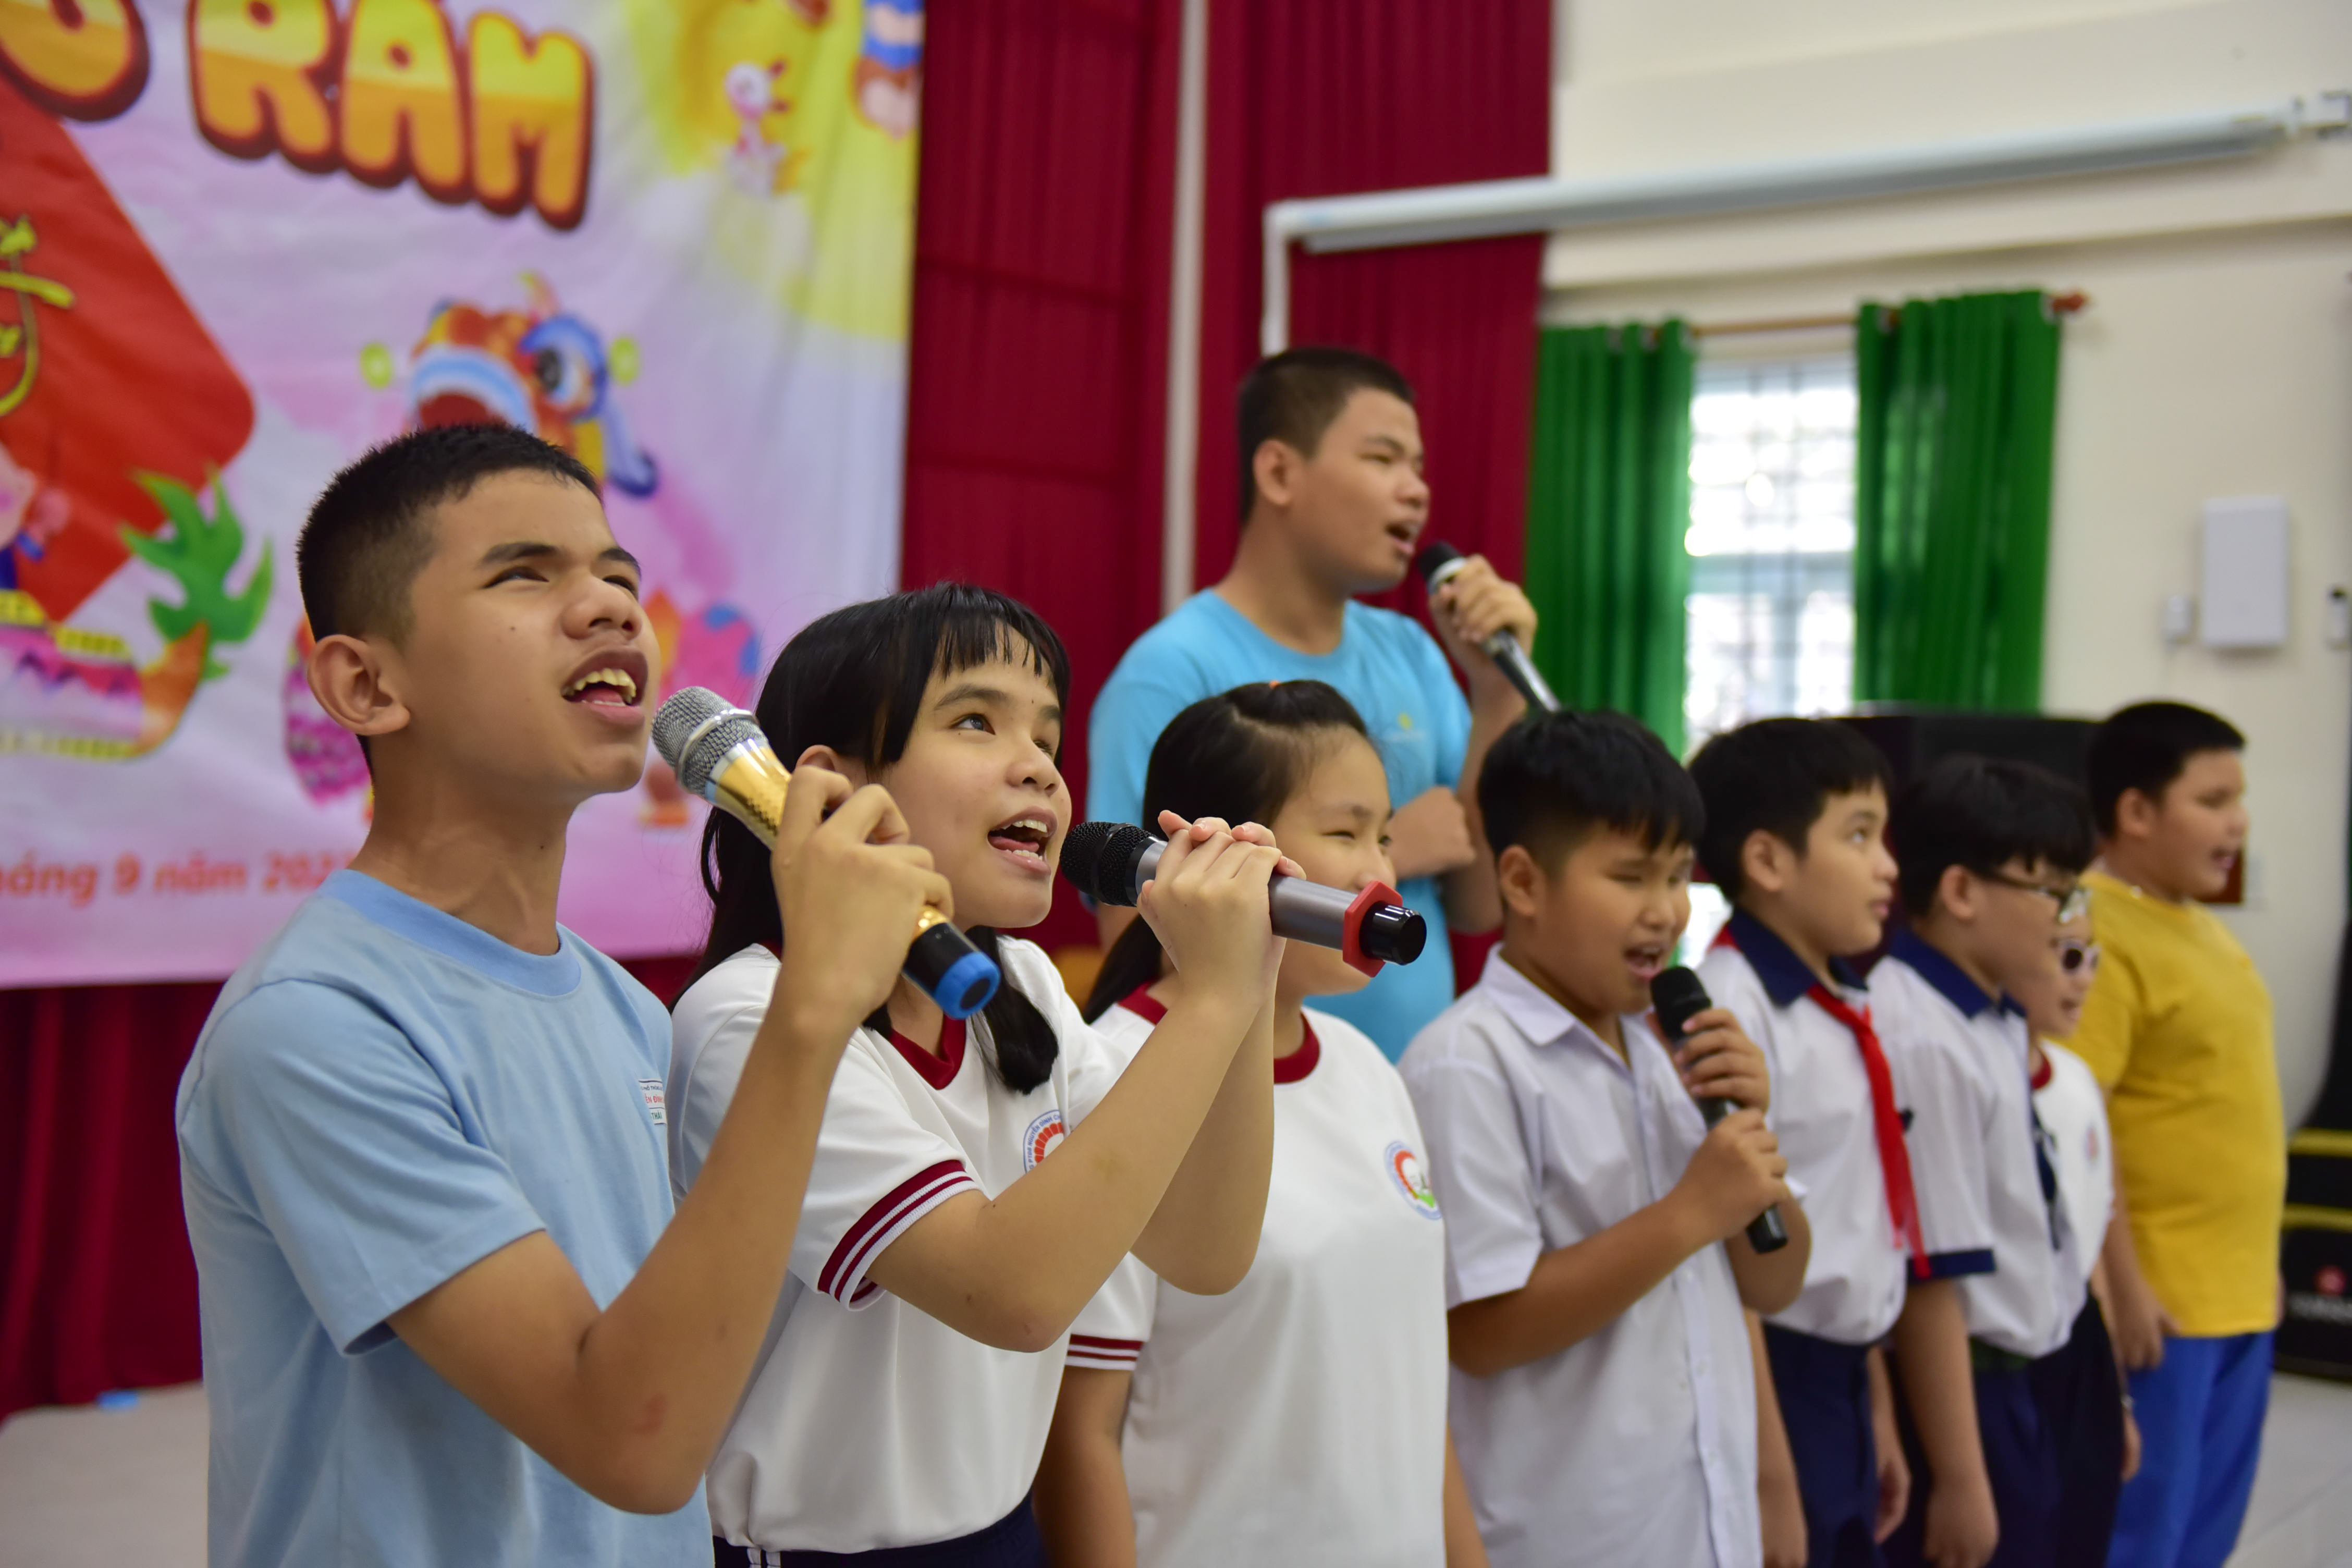 A group of students at Nguyen Dinh Chieu Special School for the Blind perform a song at an event to celebrate the Mid-Autumn Festival at the school in District 10, Ho Chi Minh City on September 9, 2022. Photo: Ngoc Phuong / Tuoi Tre News